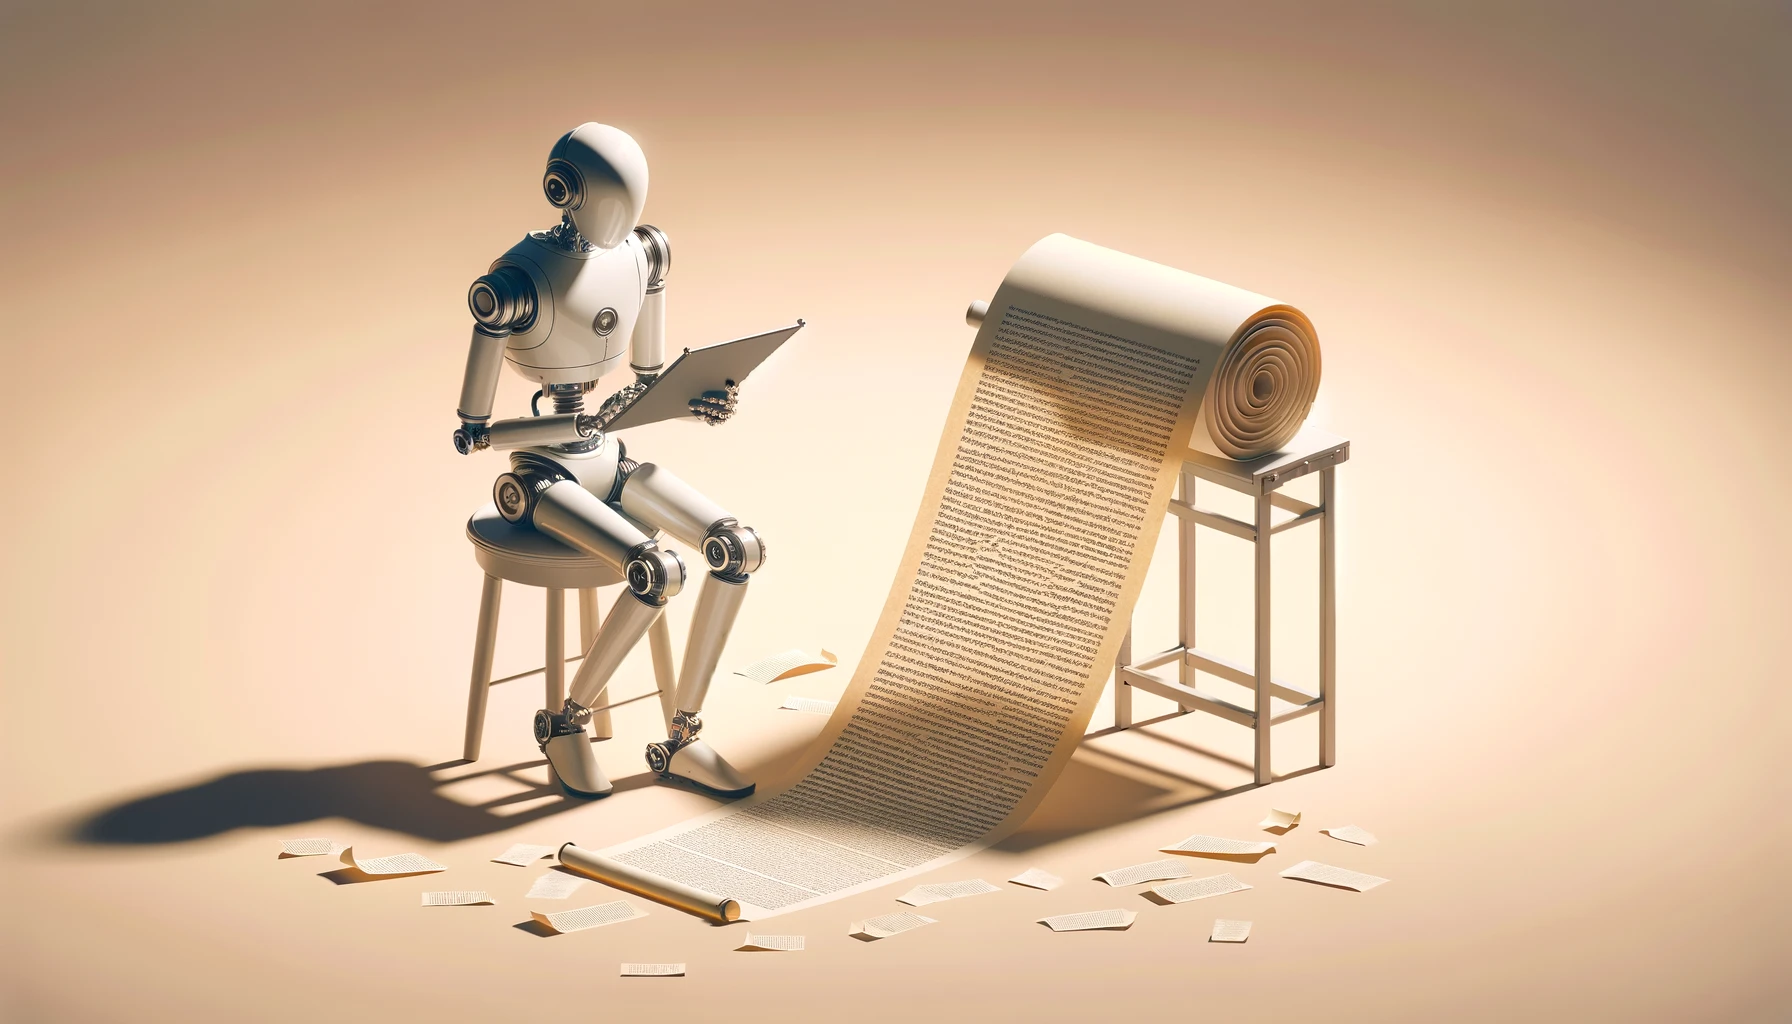 Minimalist 2:1 aspect ratio image depicting a sleek, modern-designed robot seated on a stool, engrossed in reading a long, unrolled scroll. The robot is surrounded by scattered scraps of paper, emphasizing its deep engagement with the content. The scene is set against a uniform, solid-colored background, creating a stark, uncluttered look that highlights the robot and its activity.